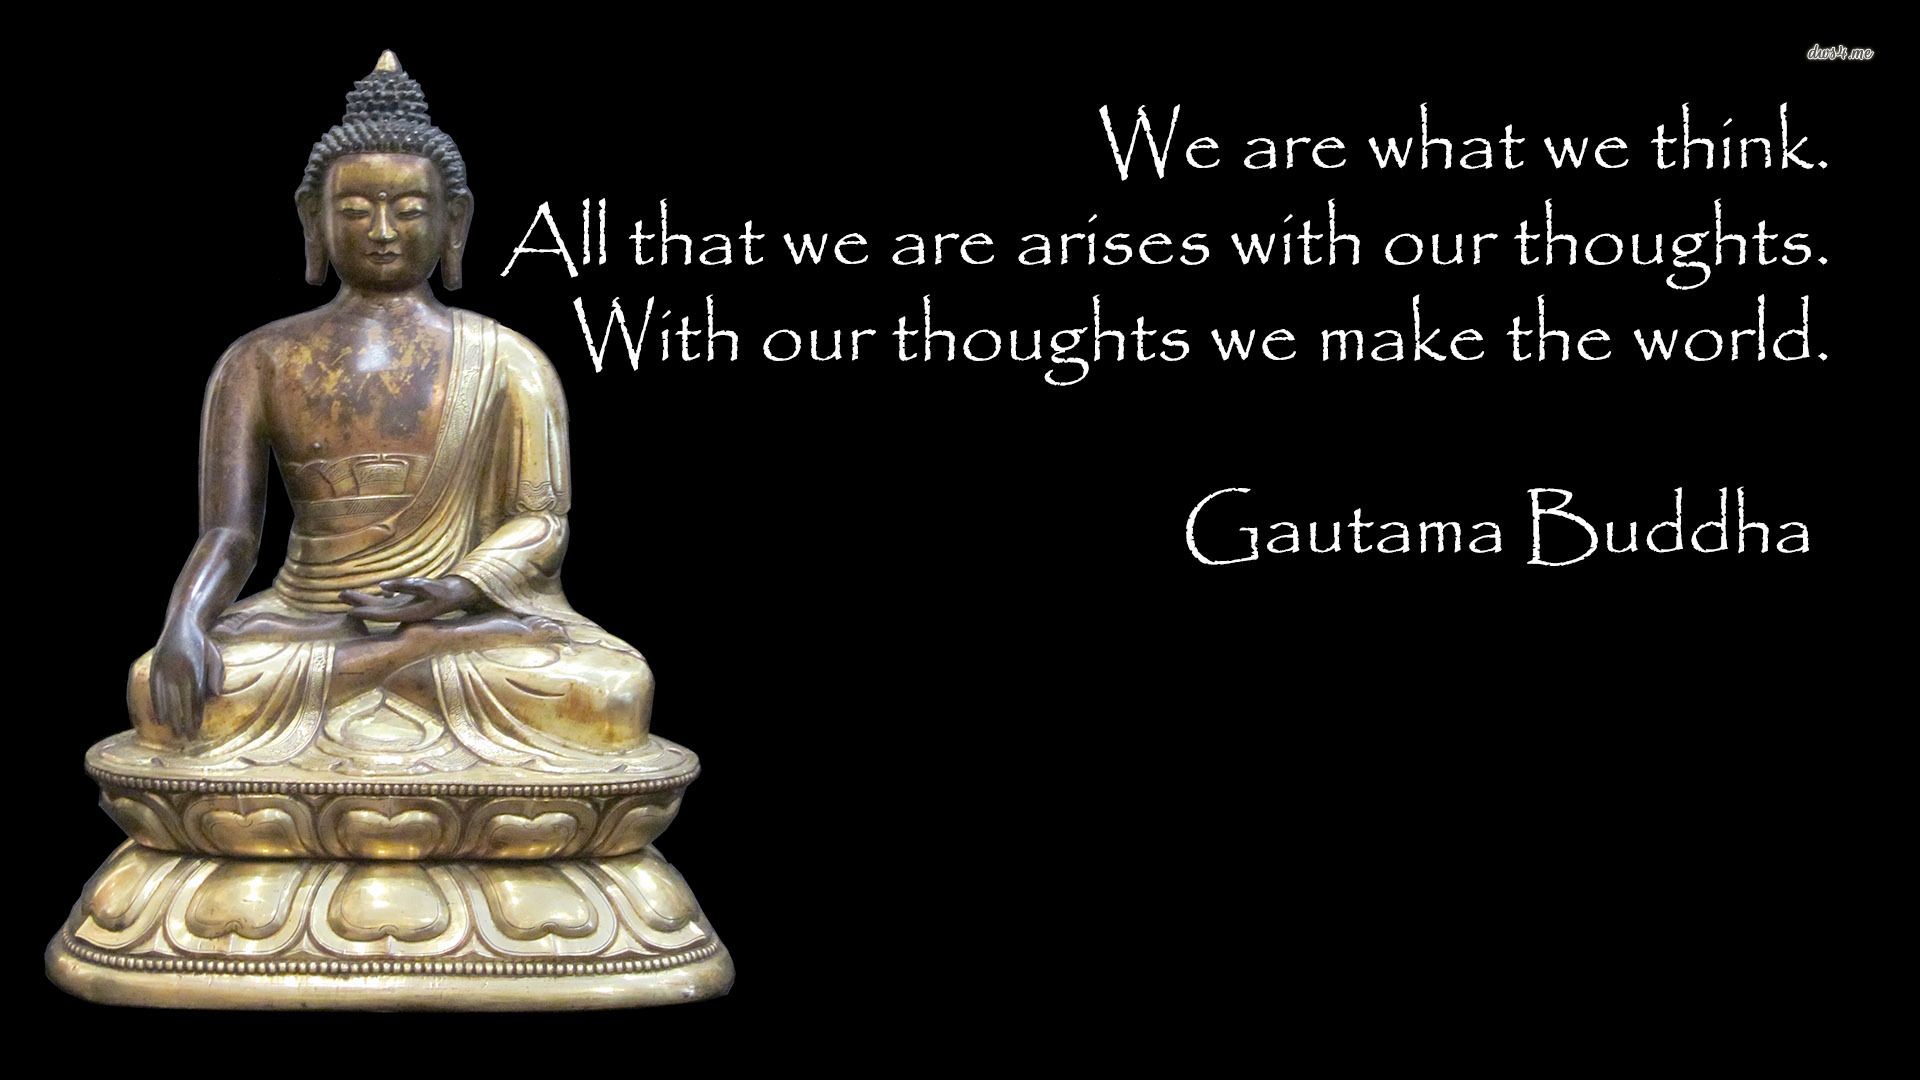 Buddha quote wallpaper - Quote wallpapers -